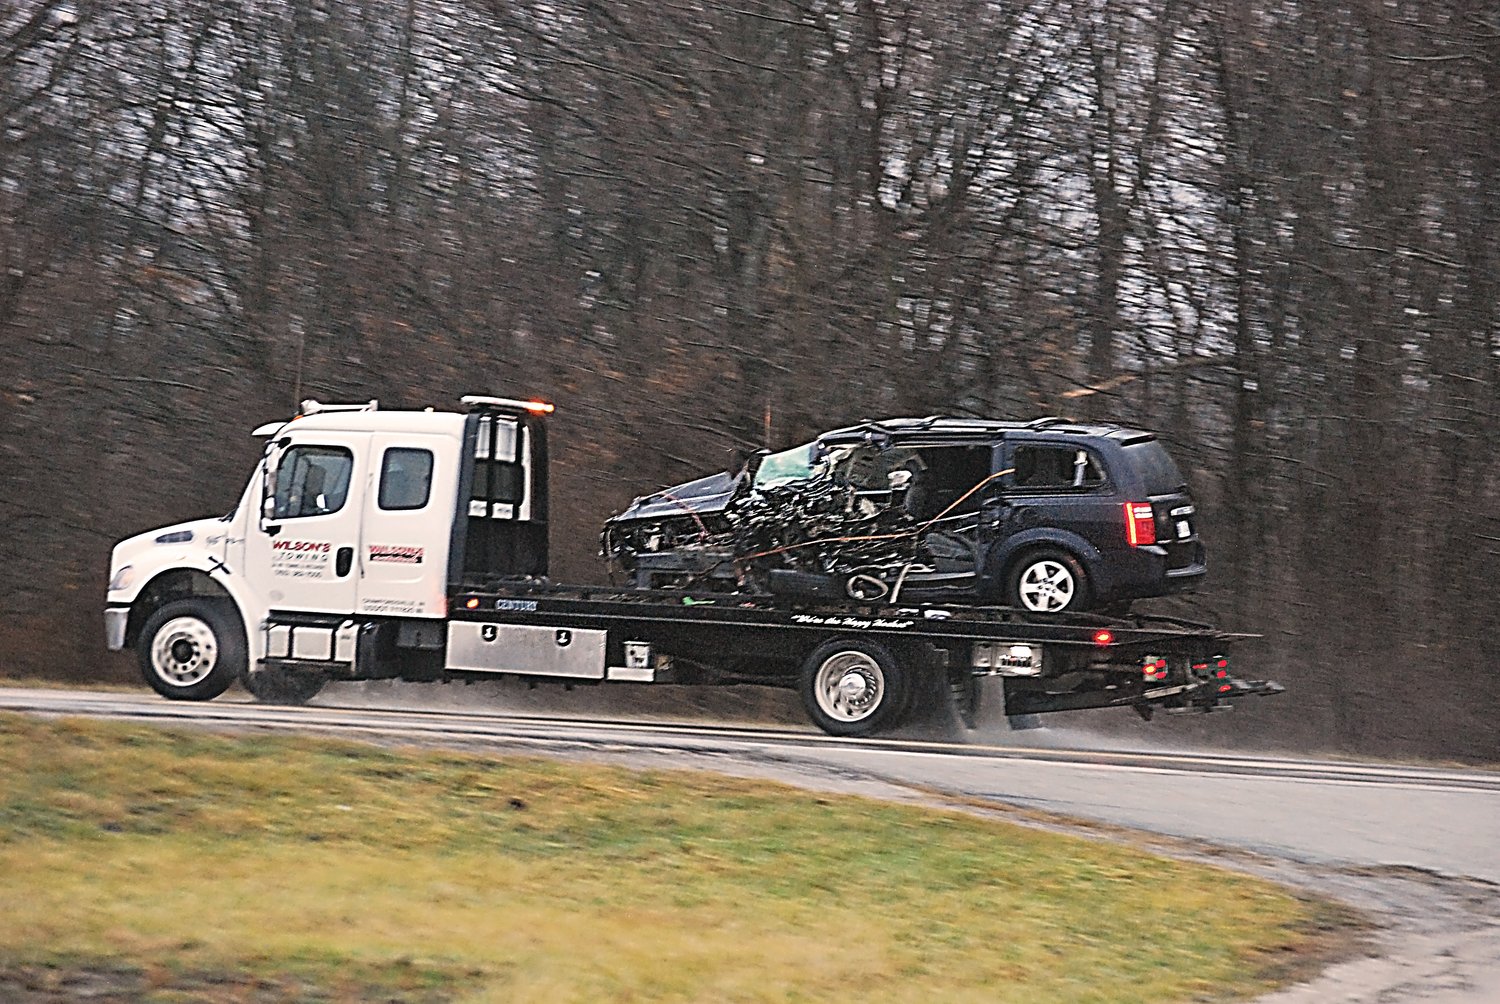 Jim Shelton/Journal Review Photos
A tow truck removes the 1999 Dodge Grand Caravan from the crash scene Monday on State Road 32, just east of C.R. 900E. The van driver, Timothy L. Steele, 58, of Ladoga was pronounced dead at the scene.